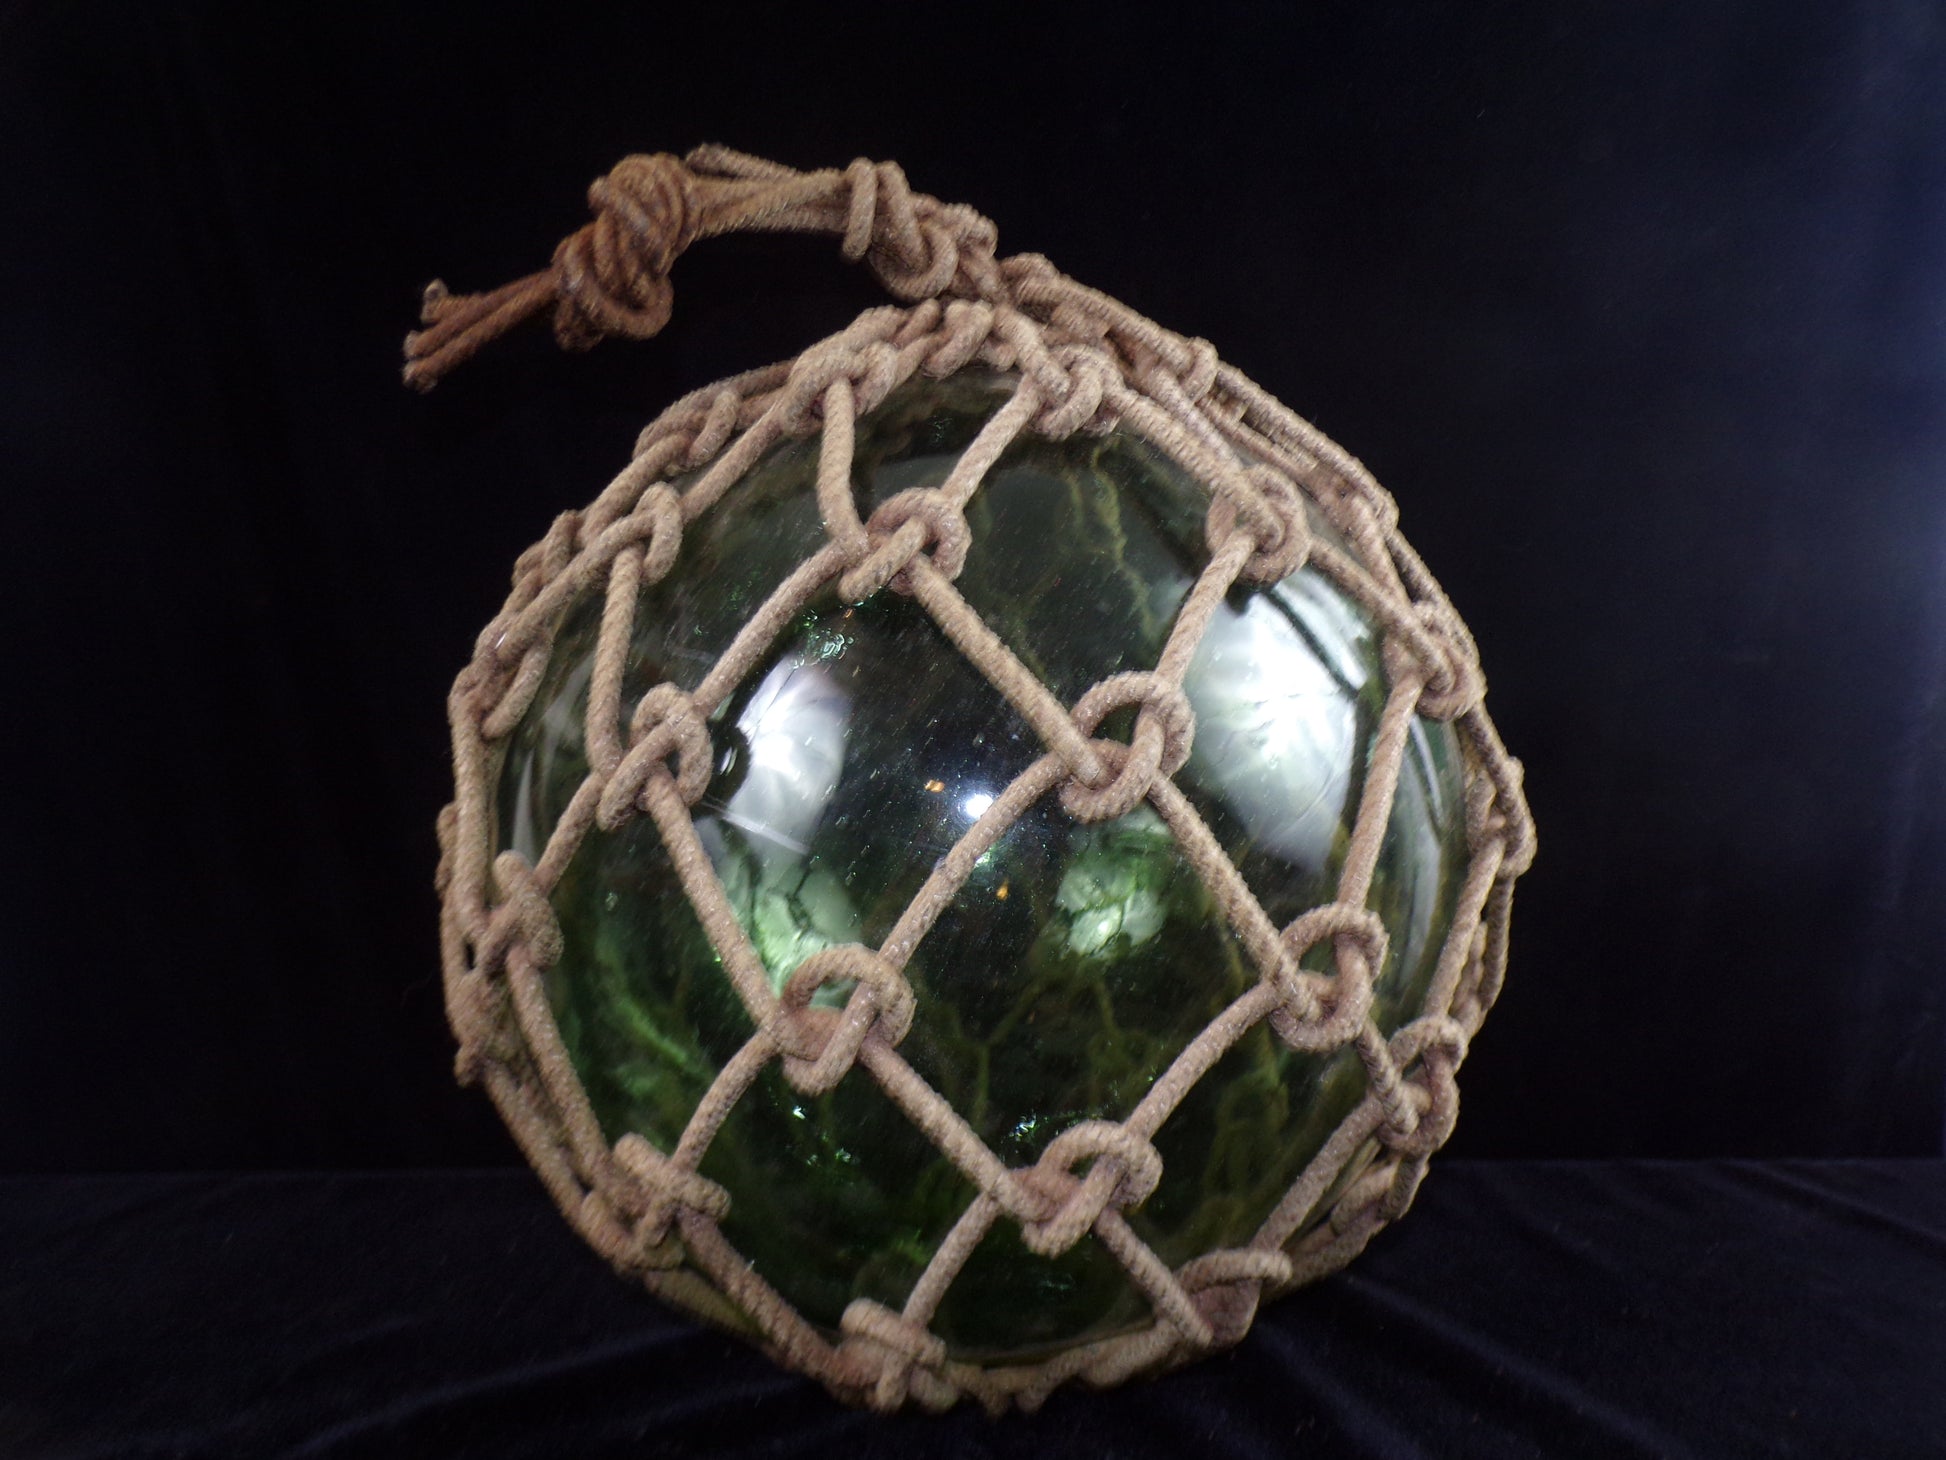 Radical (nautical) green Japanese glass fishing float! Can use a cleaning,  but the glass is in great shape. 12” tall. $40 #fatrabbitky